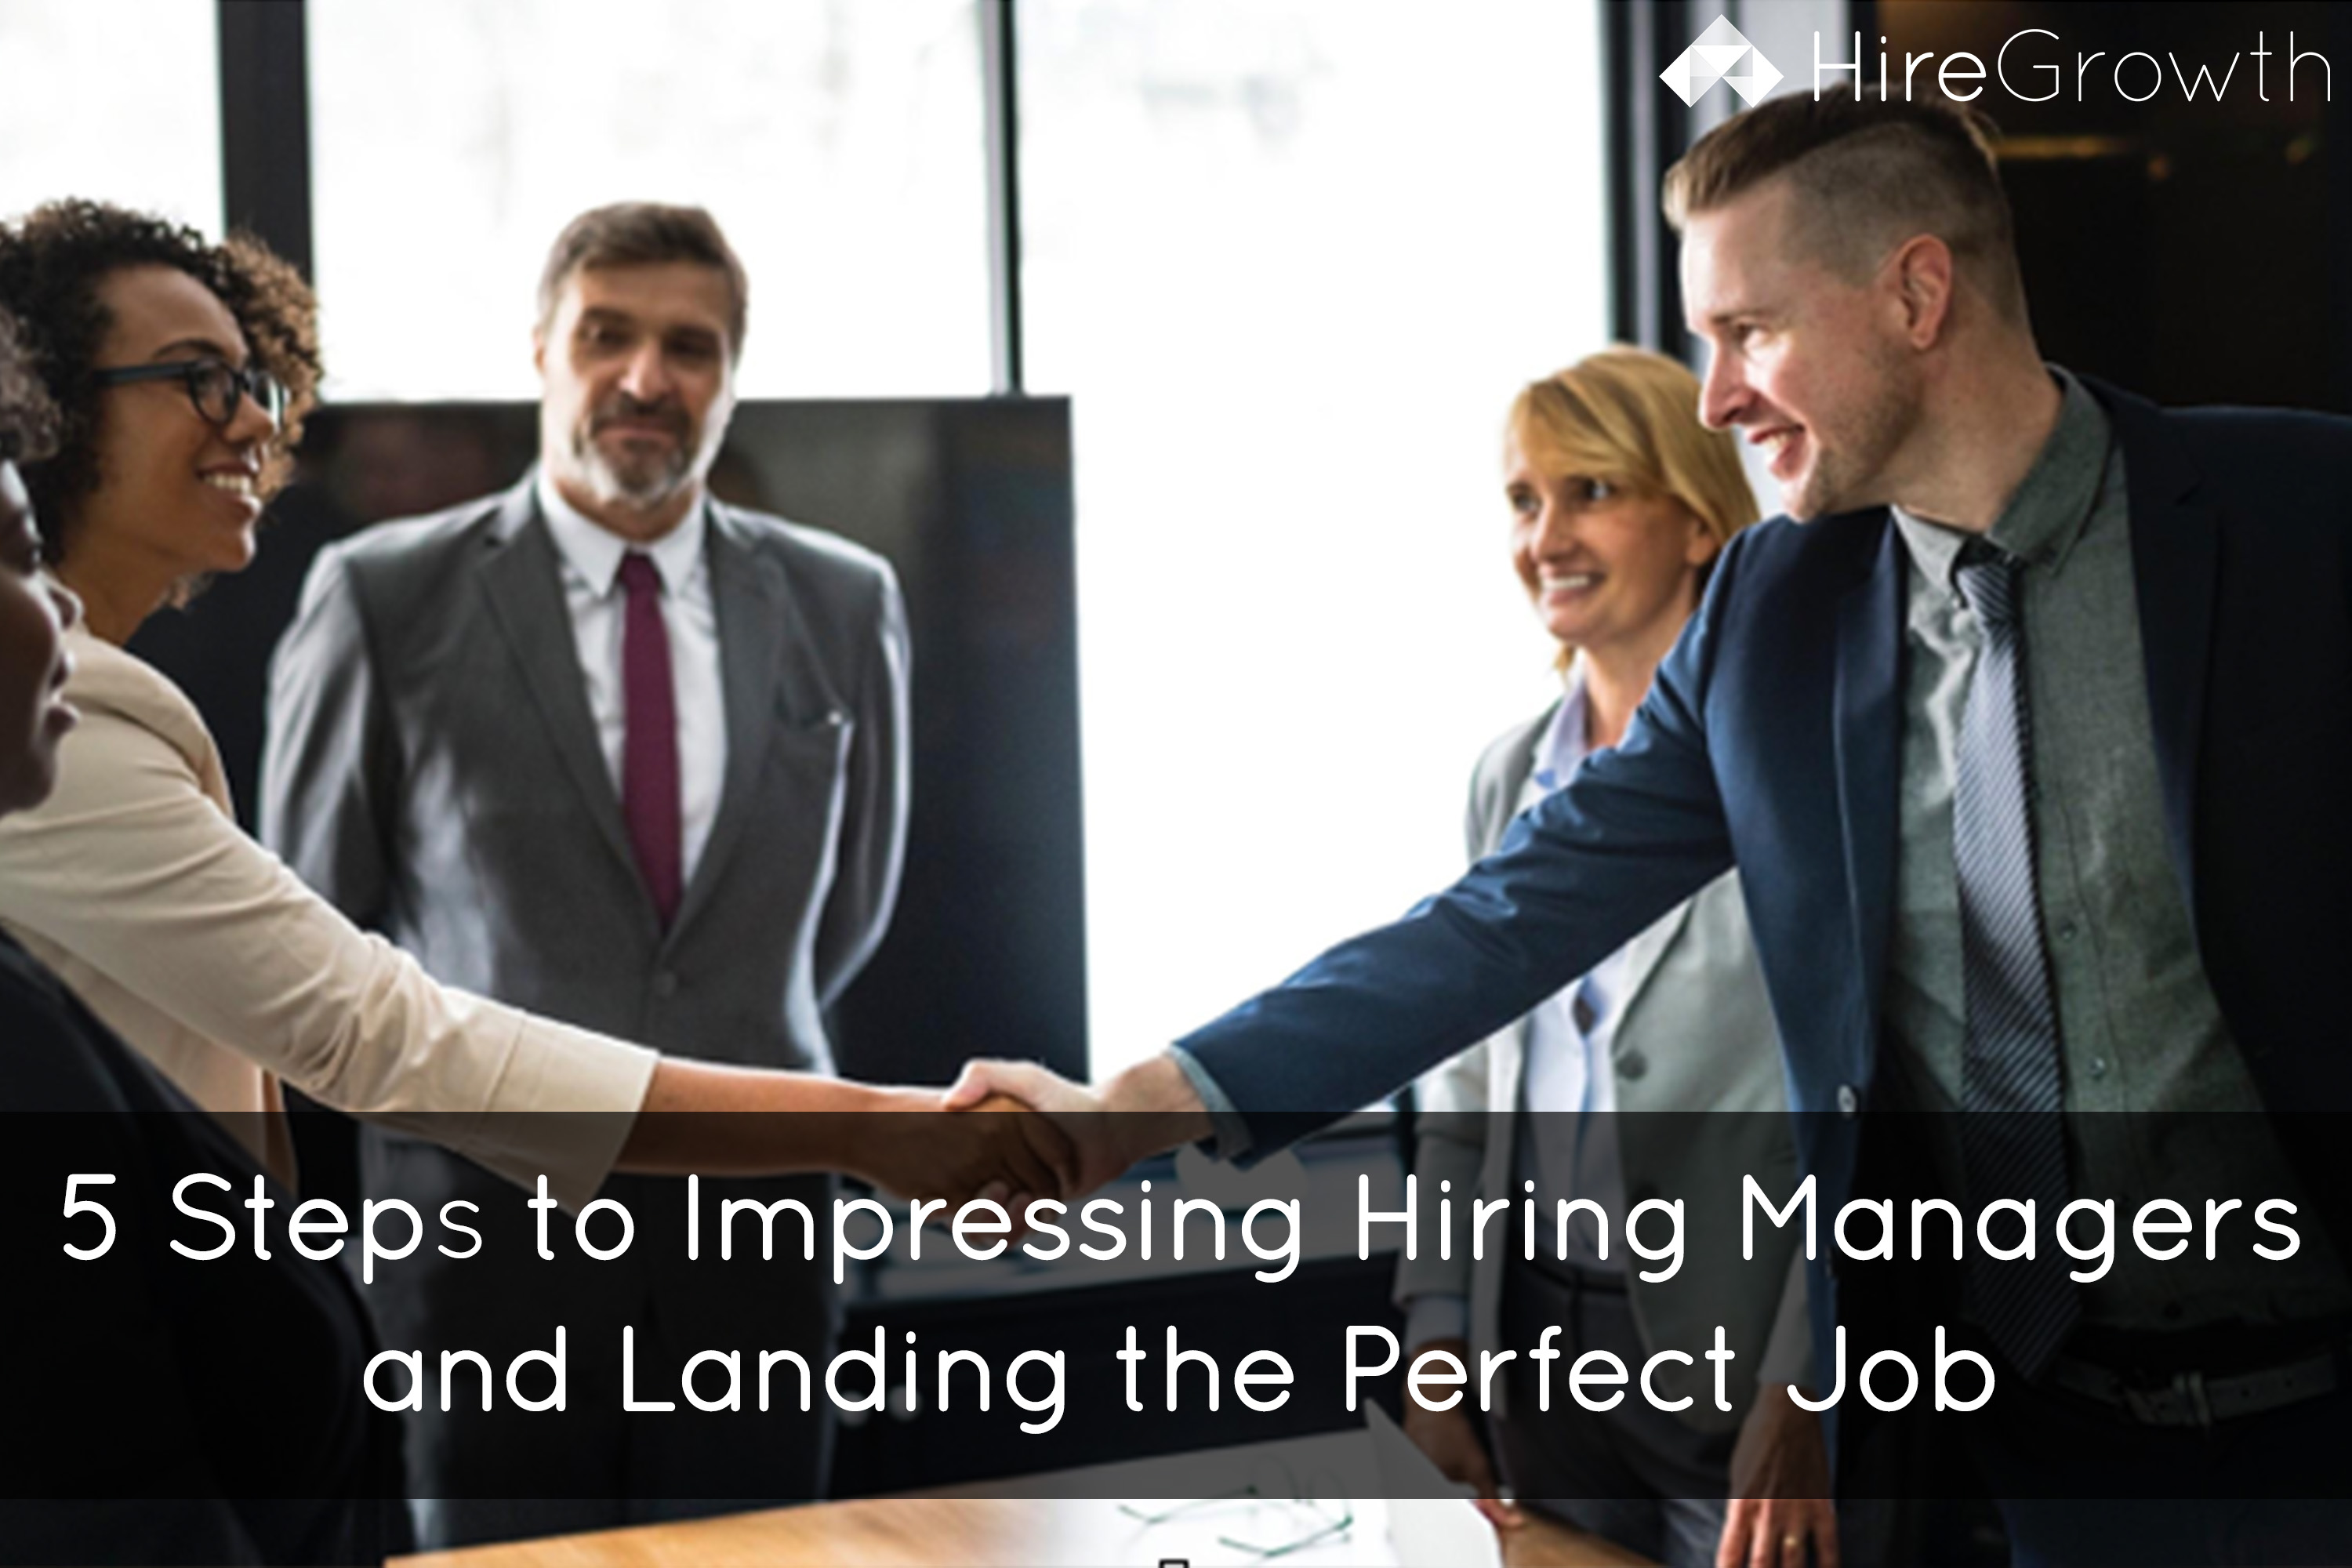 5 Steps to Impressing Hiring Managers and Landing the Perfect Job